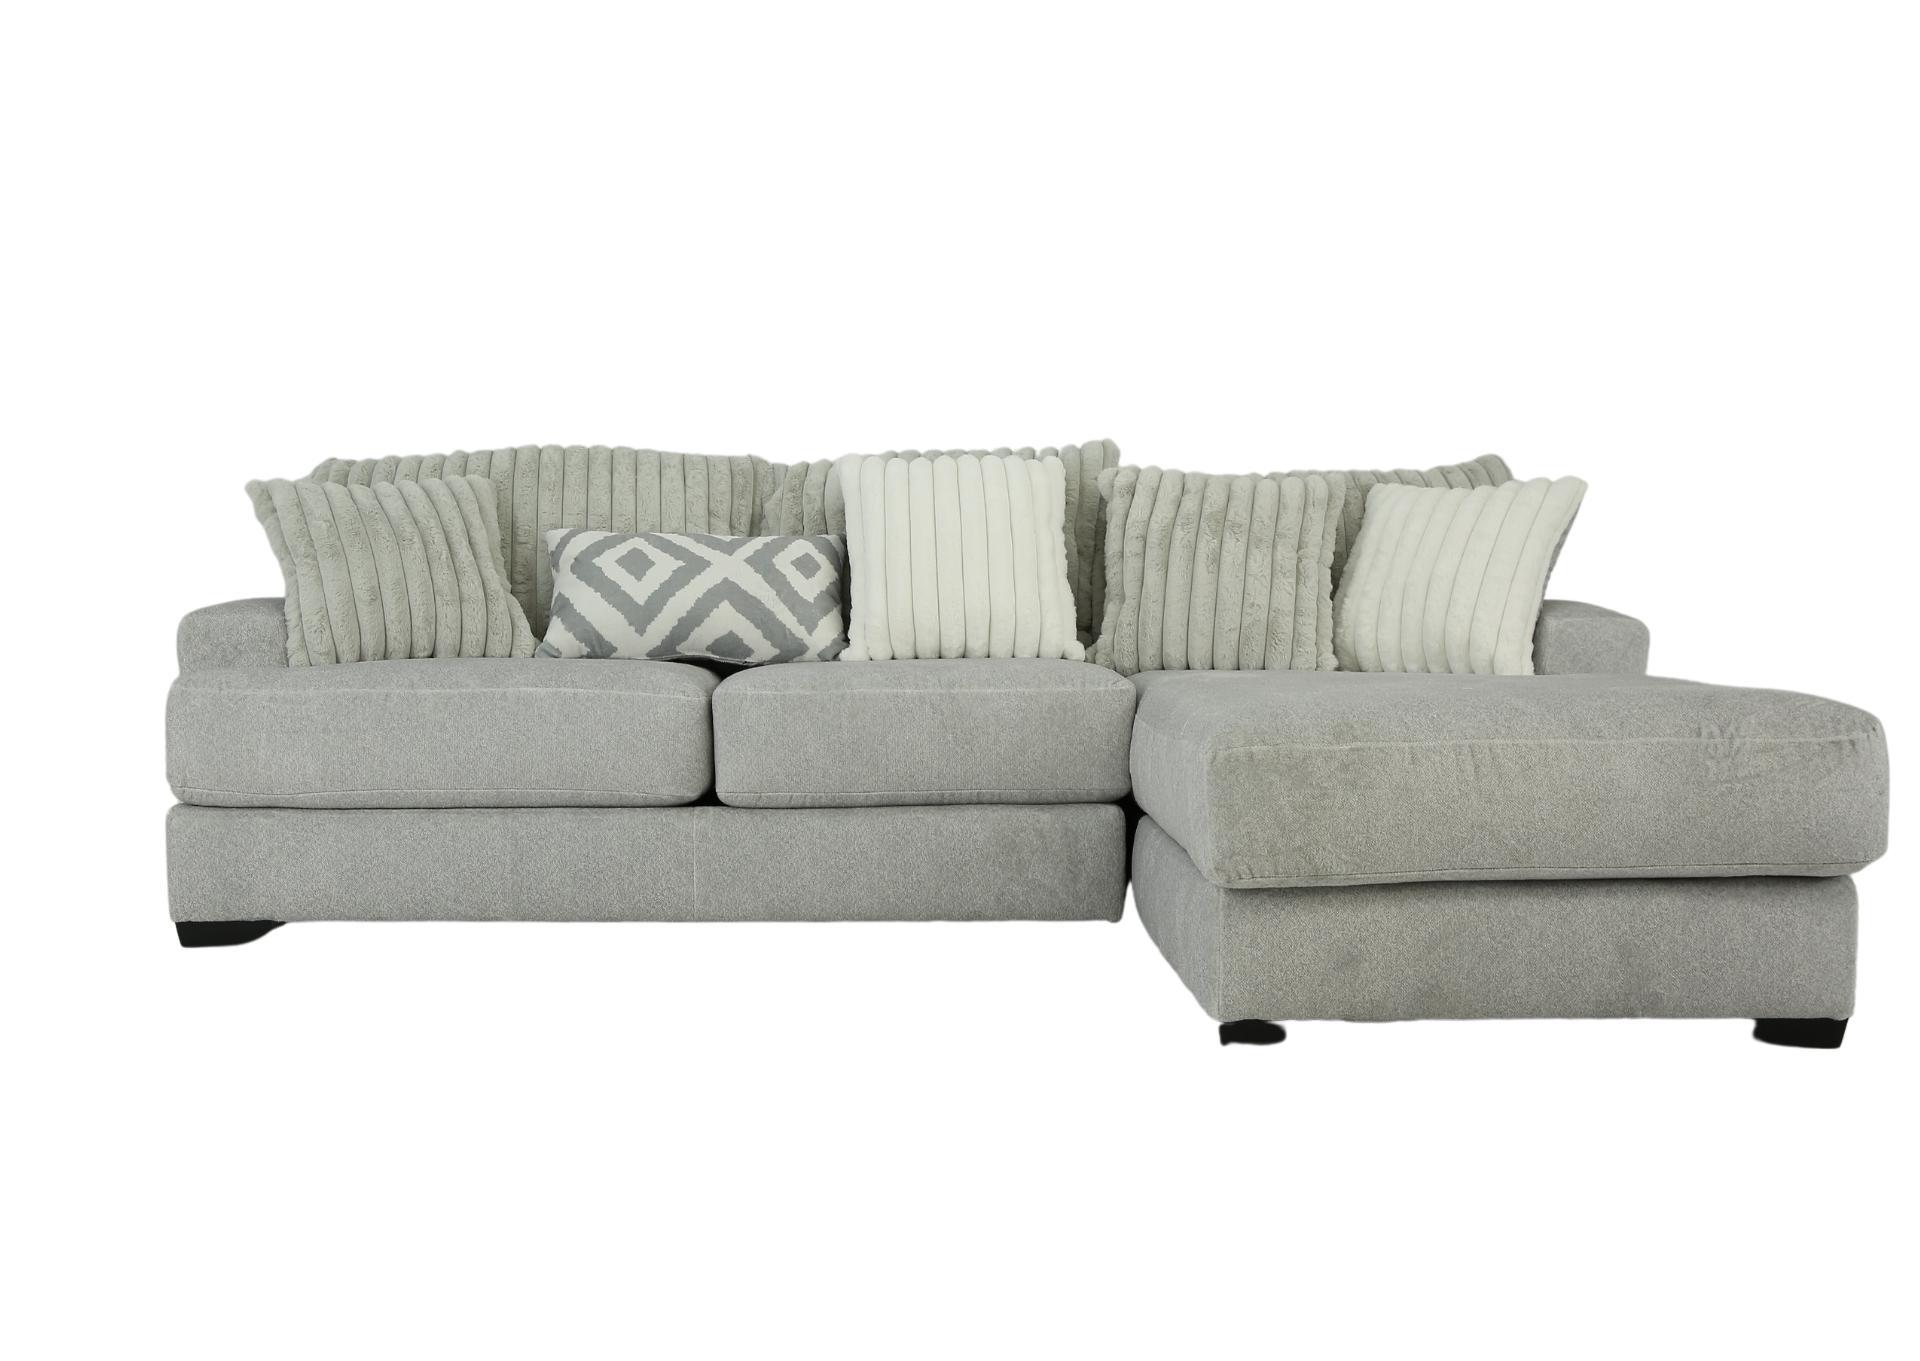 MONDO SILVER 2PC SECTIONAL,ALBANY INDUSTRIES, INC.